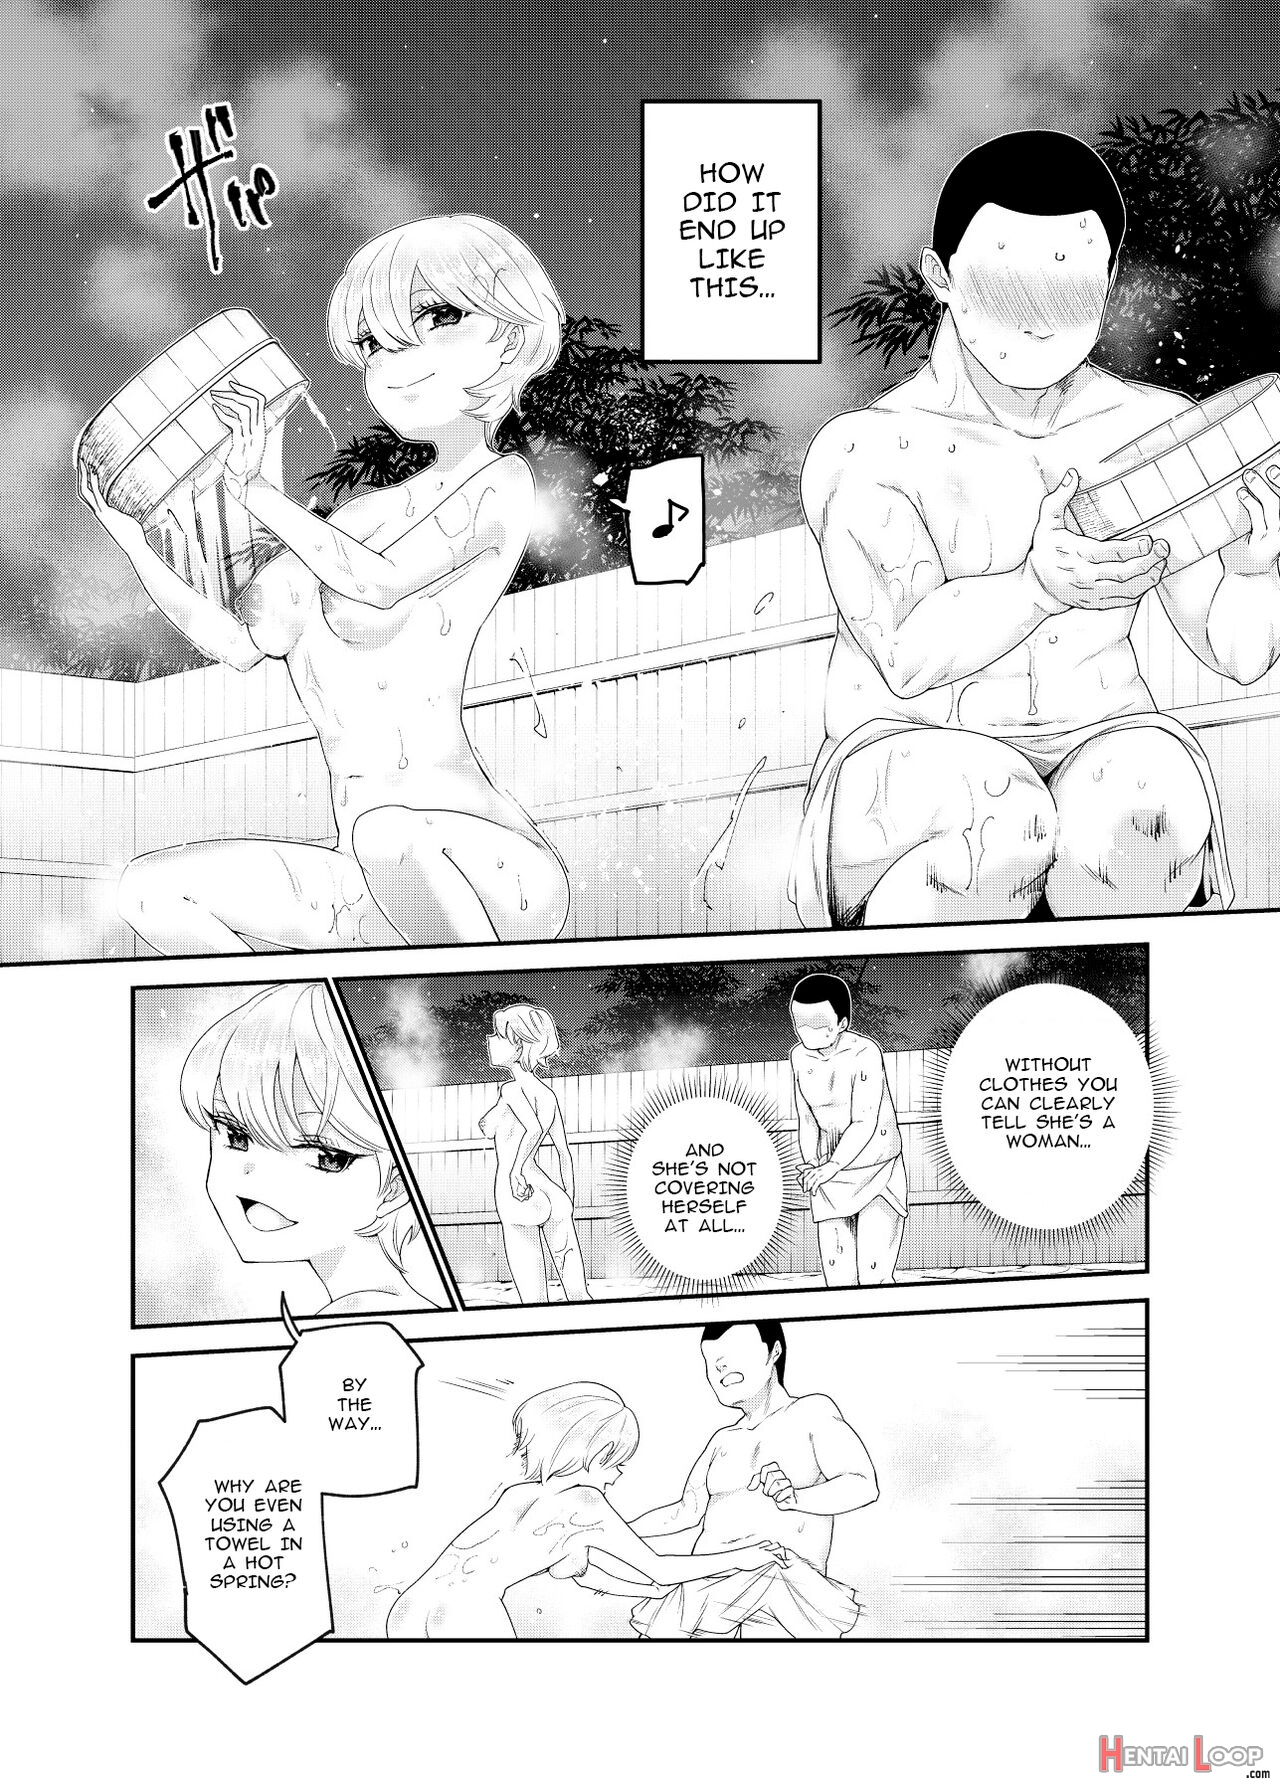 Then You Shouldn't Worry, Because I'm A Girl! Ex! page 7